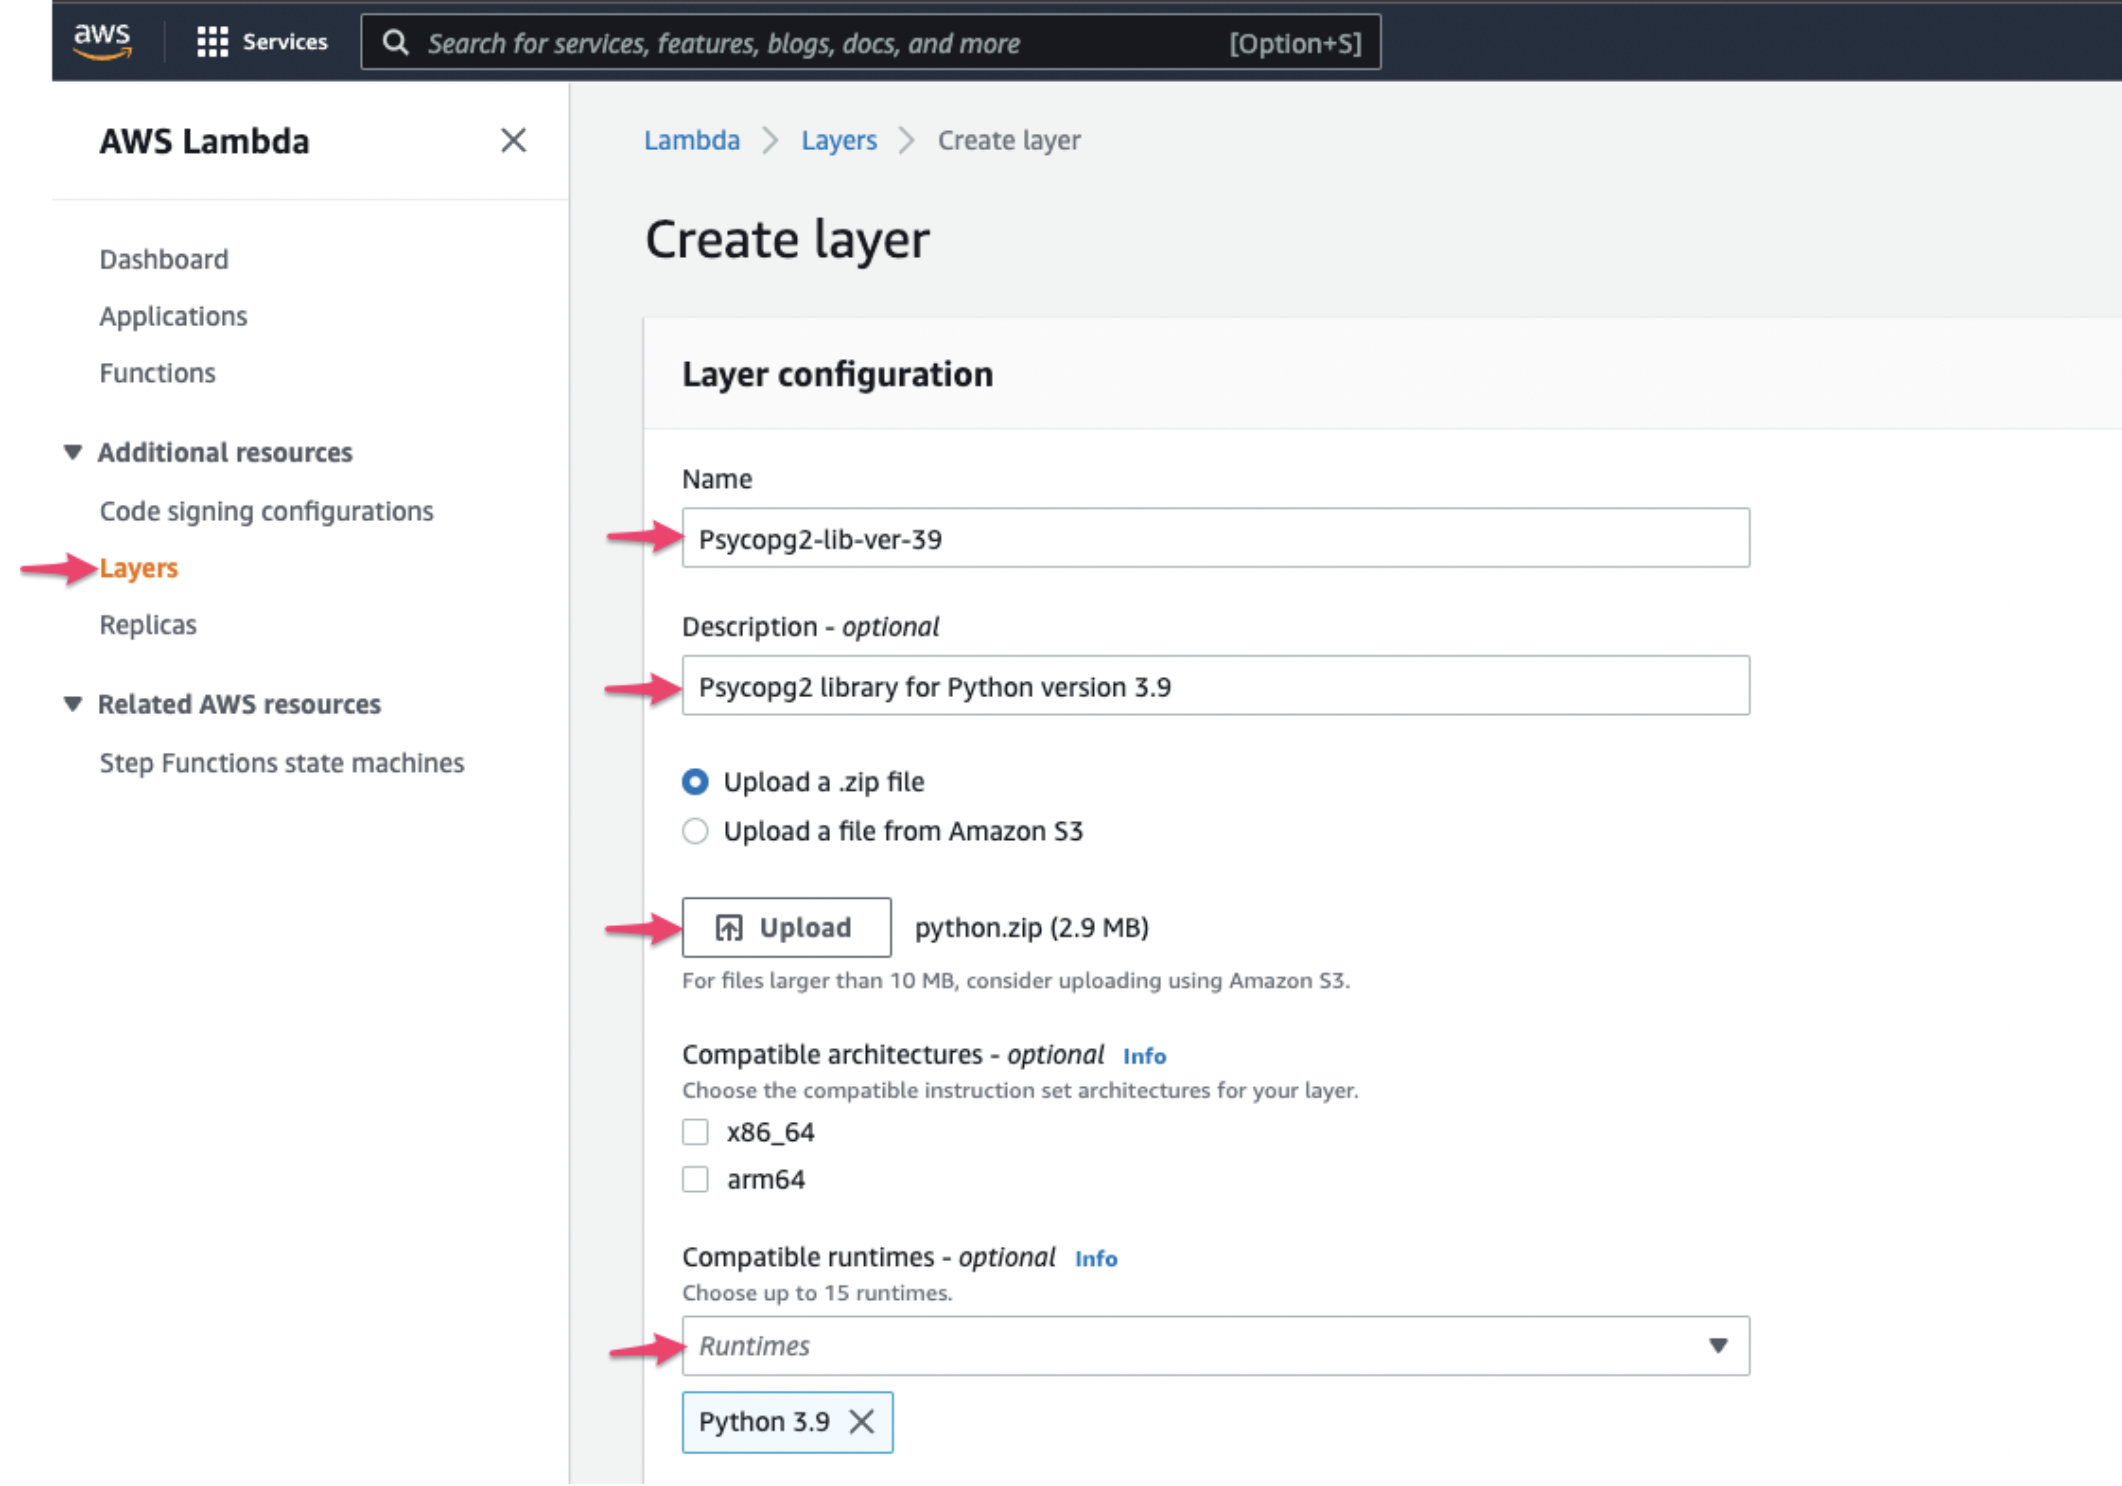 Creating a new layer in AWS Lambda.